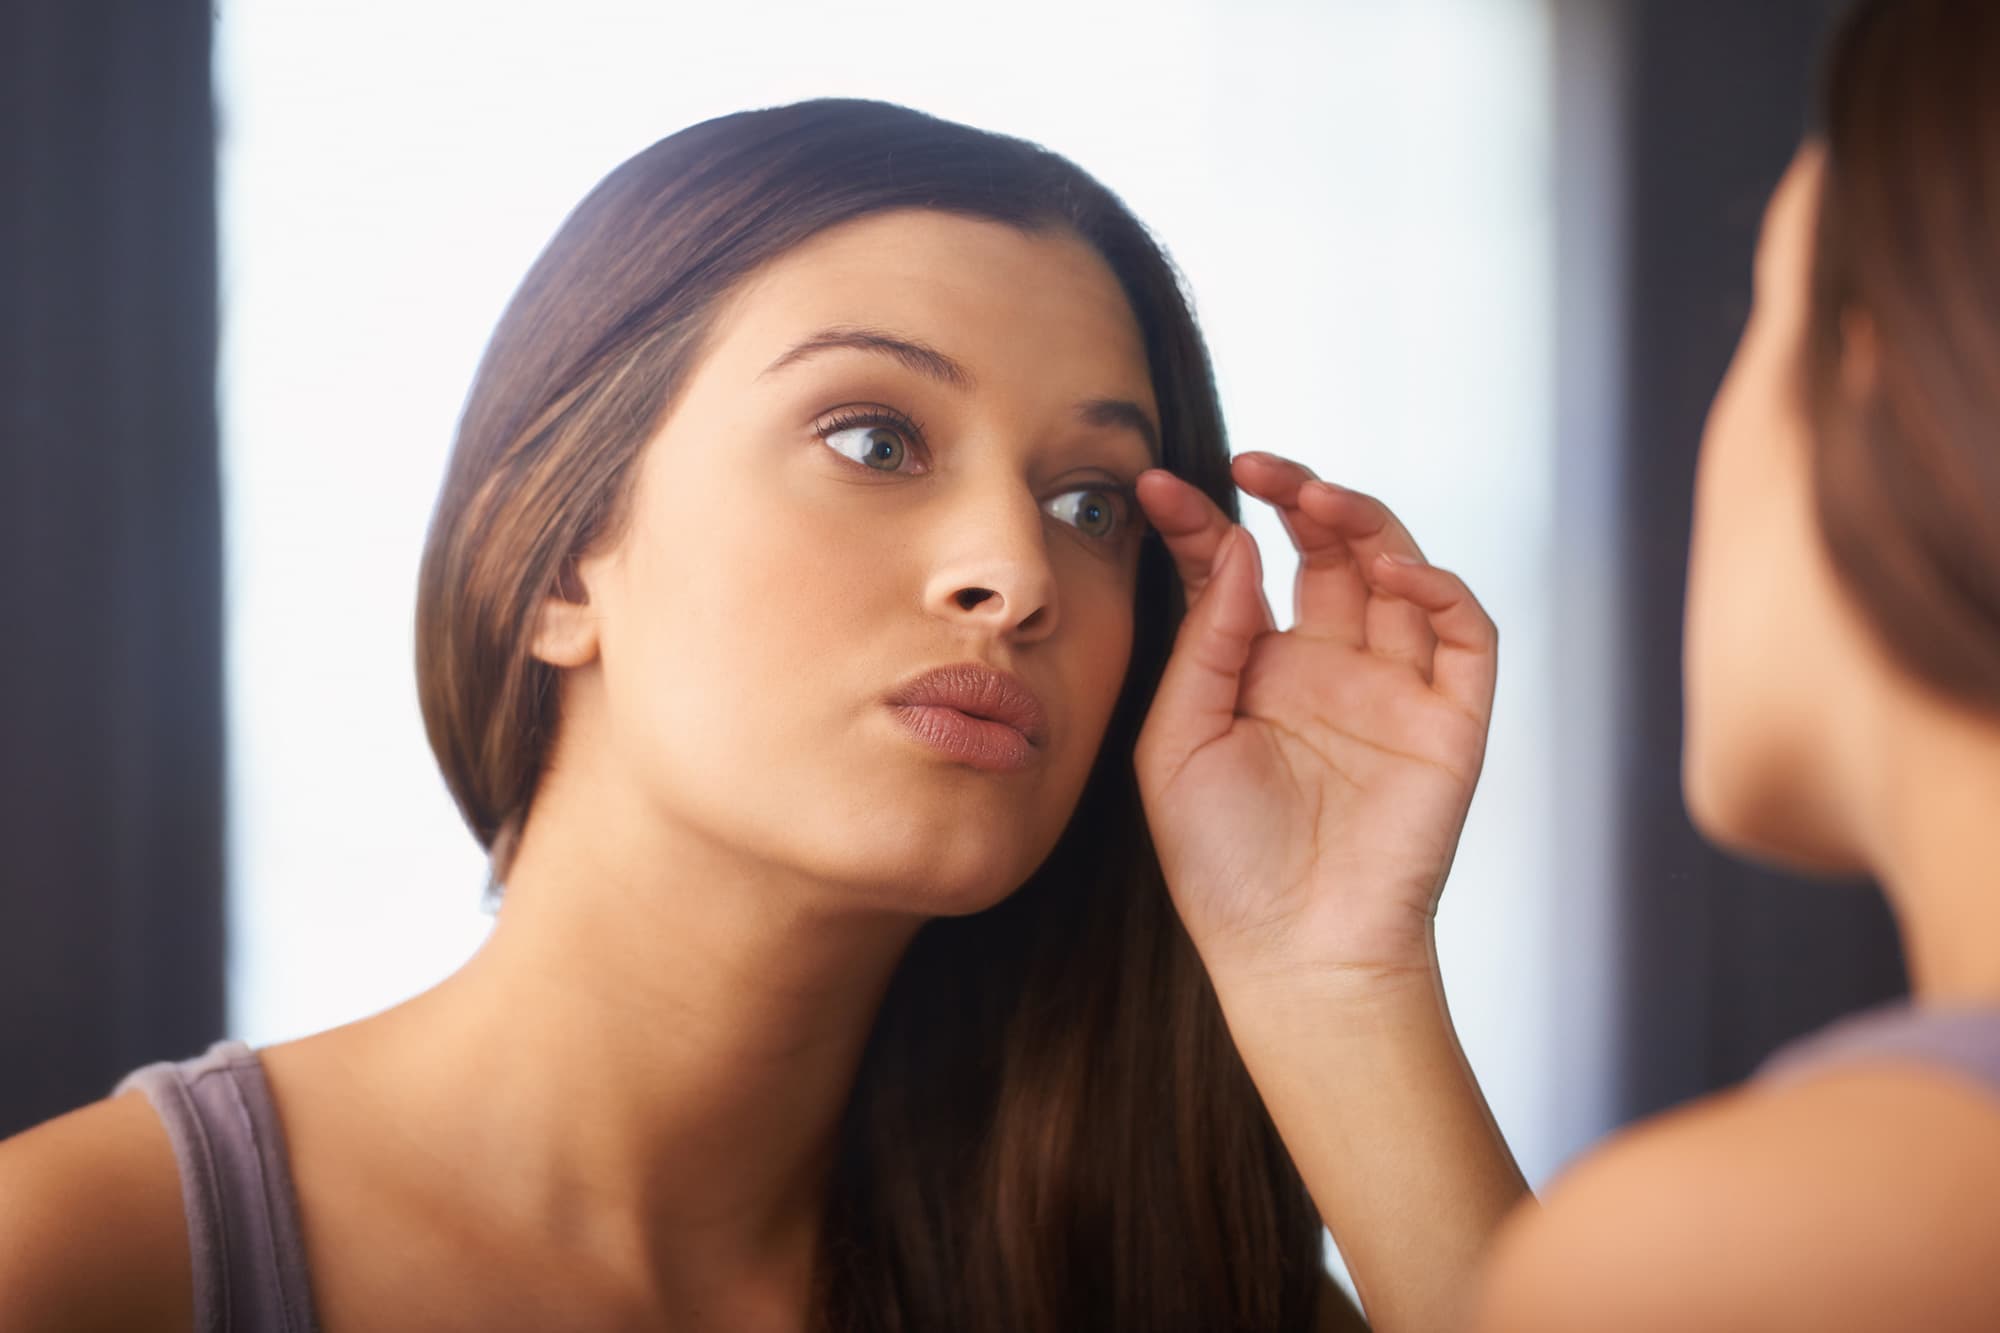 Image of a woman looking at her own reflection, touching her eye lashes